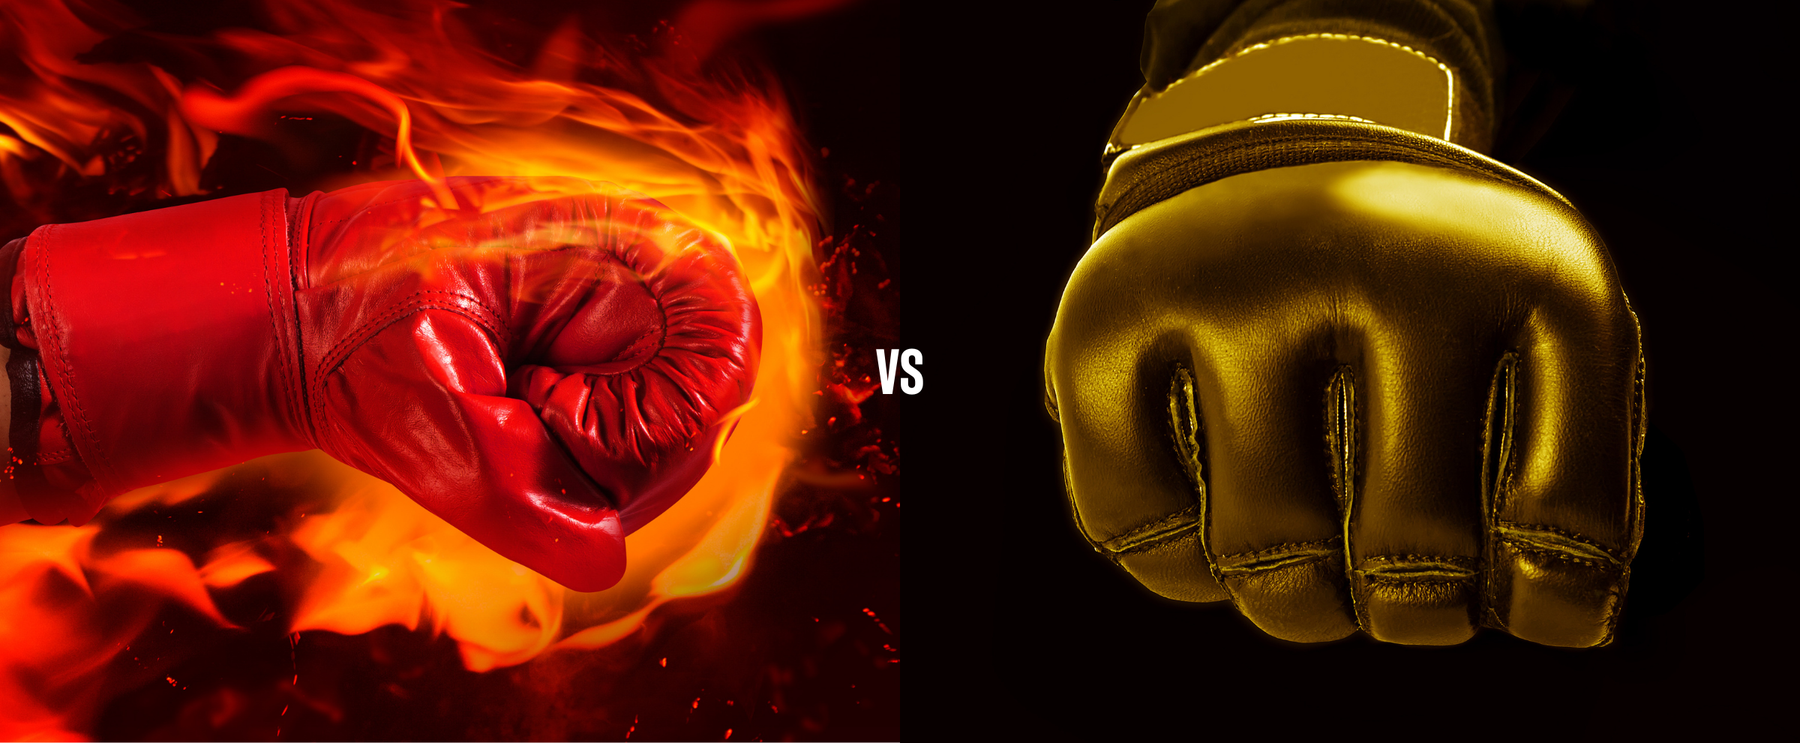 Who Punches Harder: Boxers or MMA Fighters?